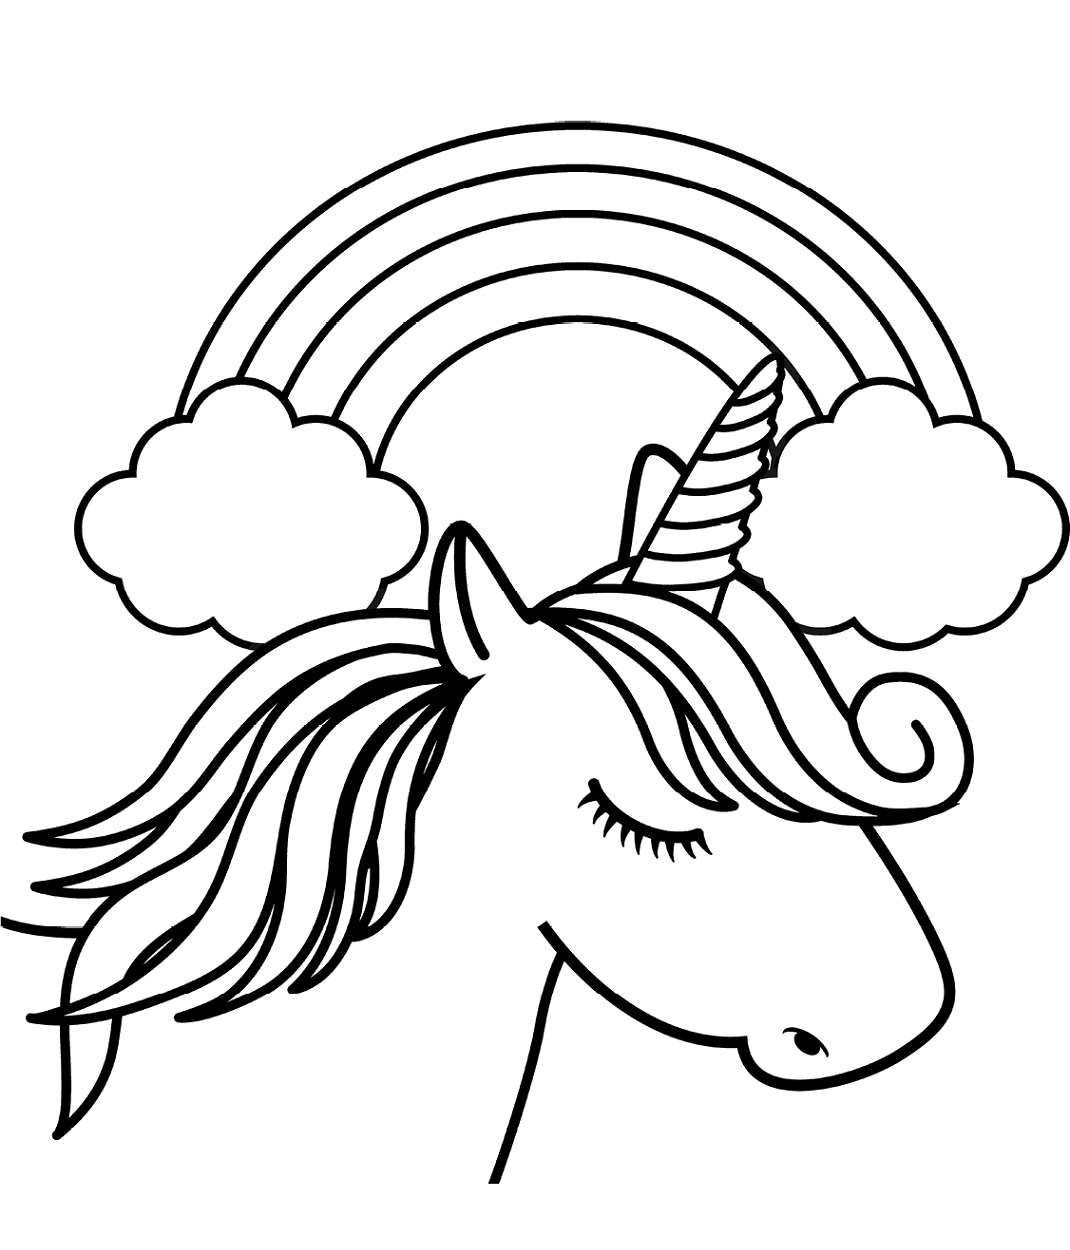 rainbow-unicorn-printable-pictures-unicorn-coloring-pages-printable